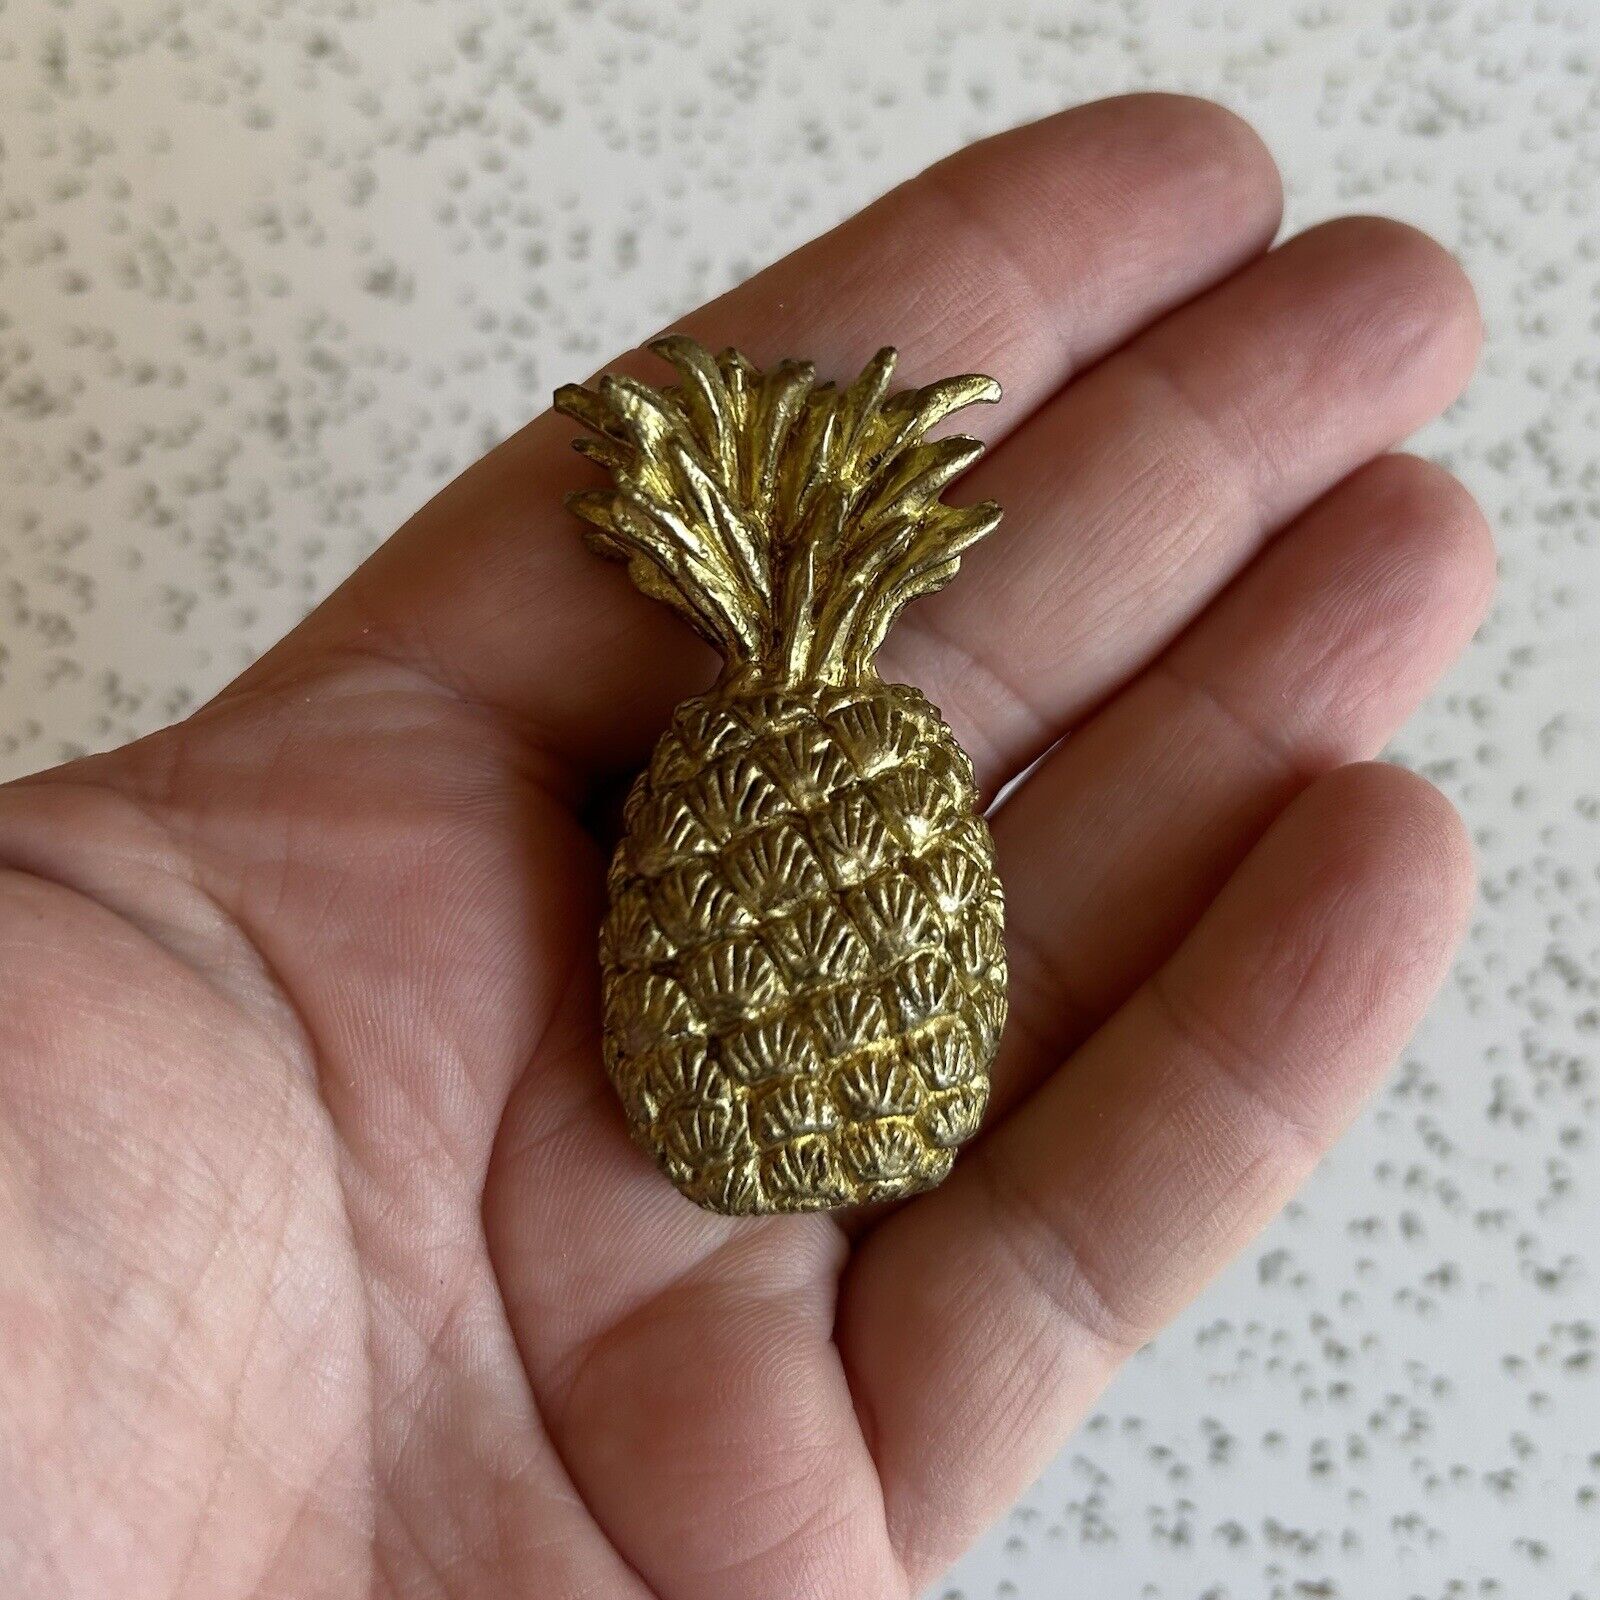 Vintage Brass Pineapple Paperweight, Solid Brass Mini Pineapple Paperweight 2”